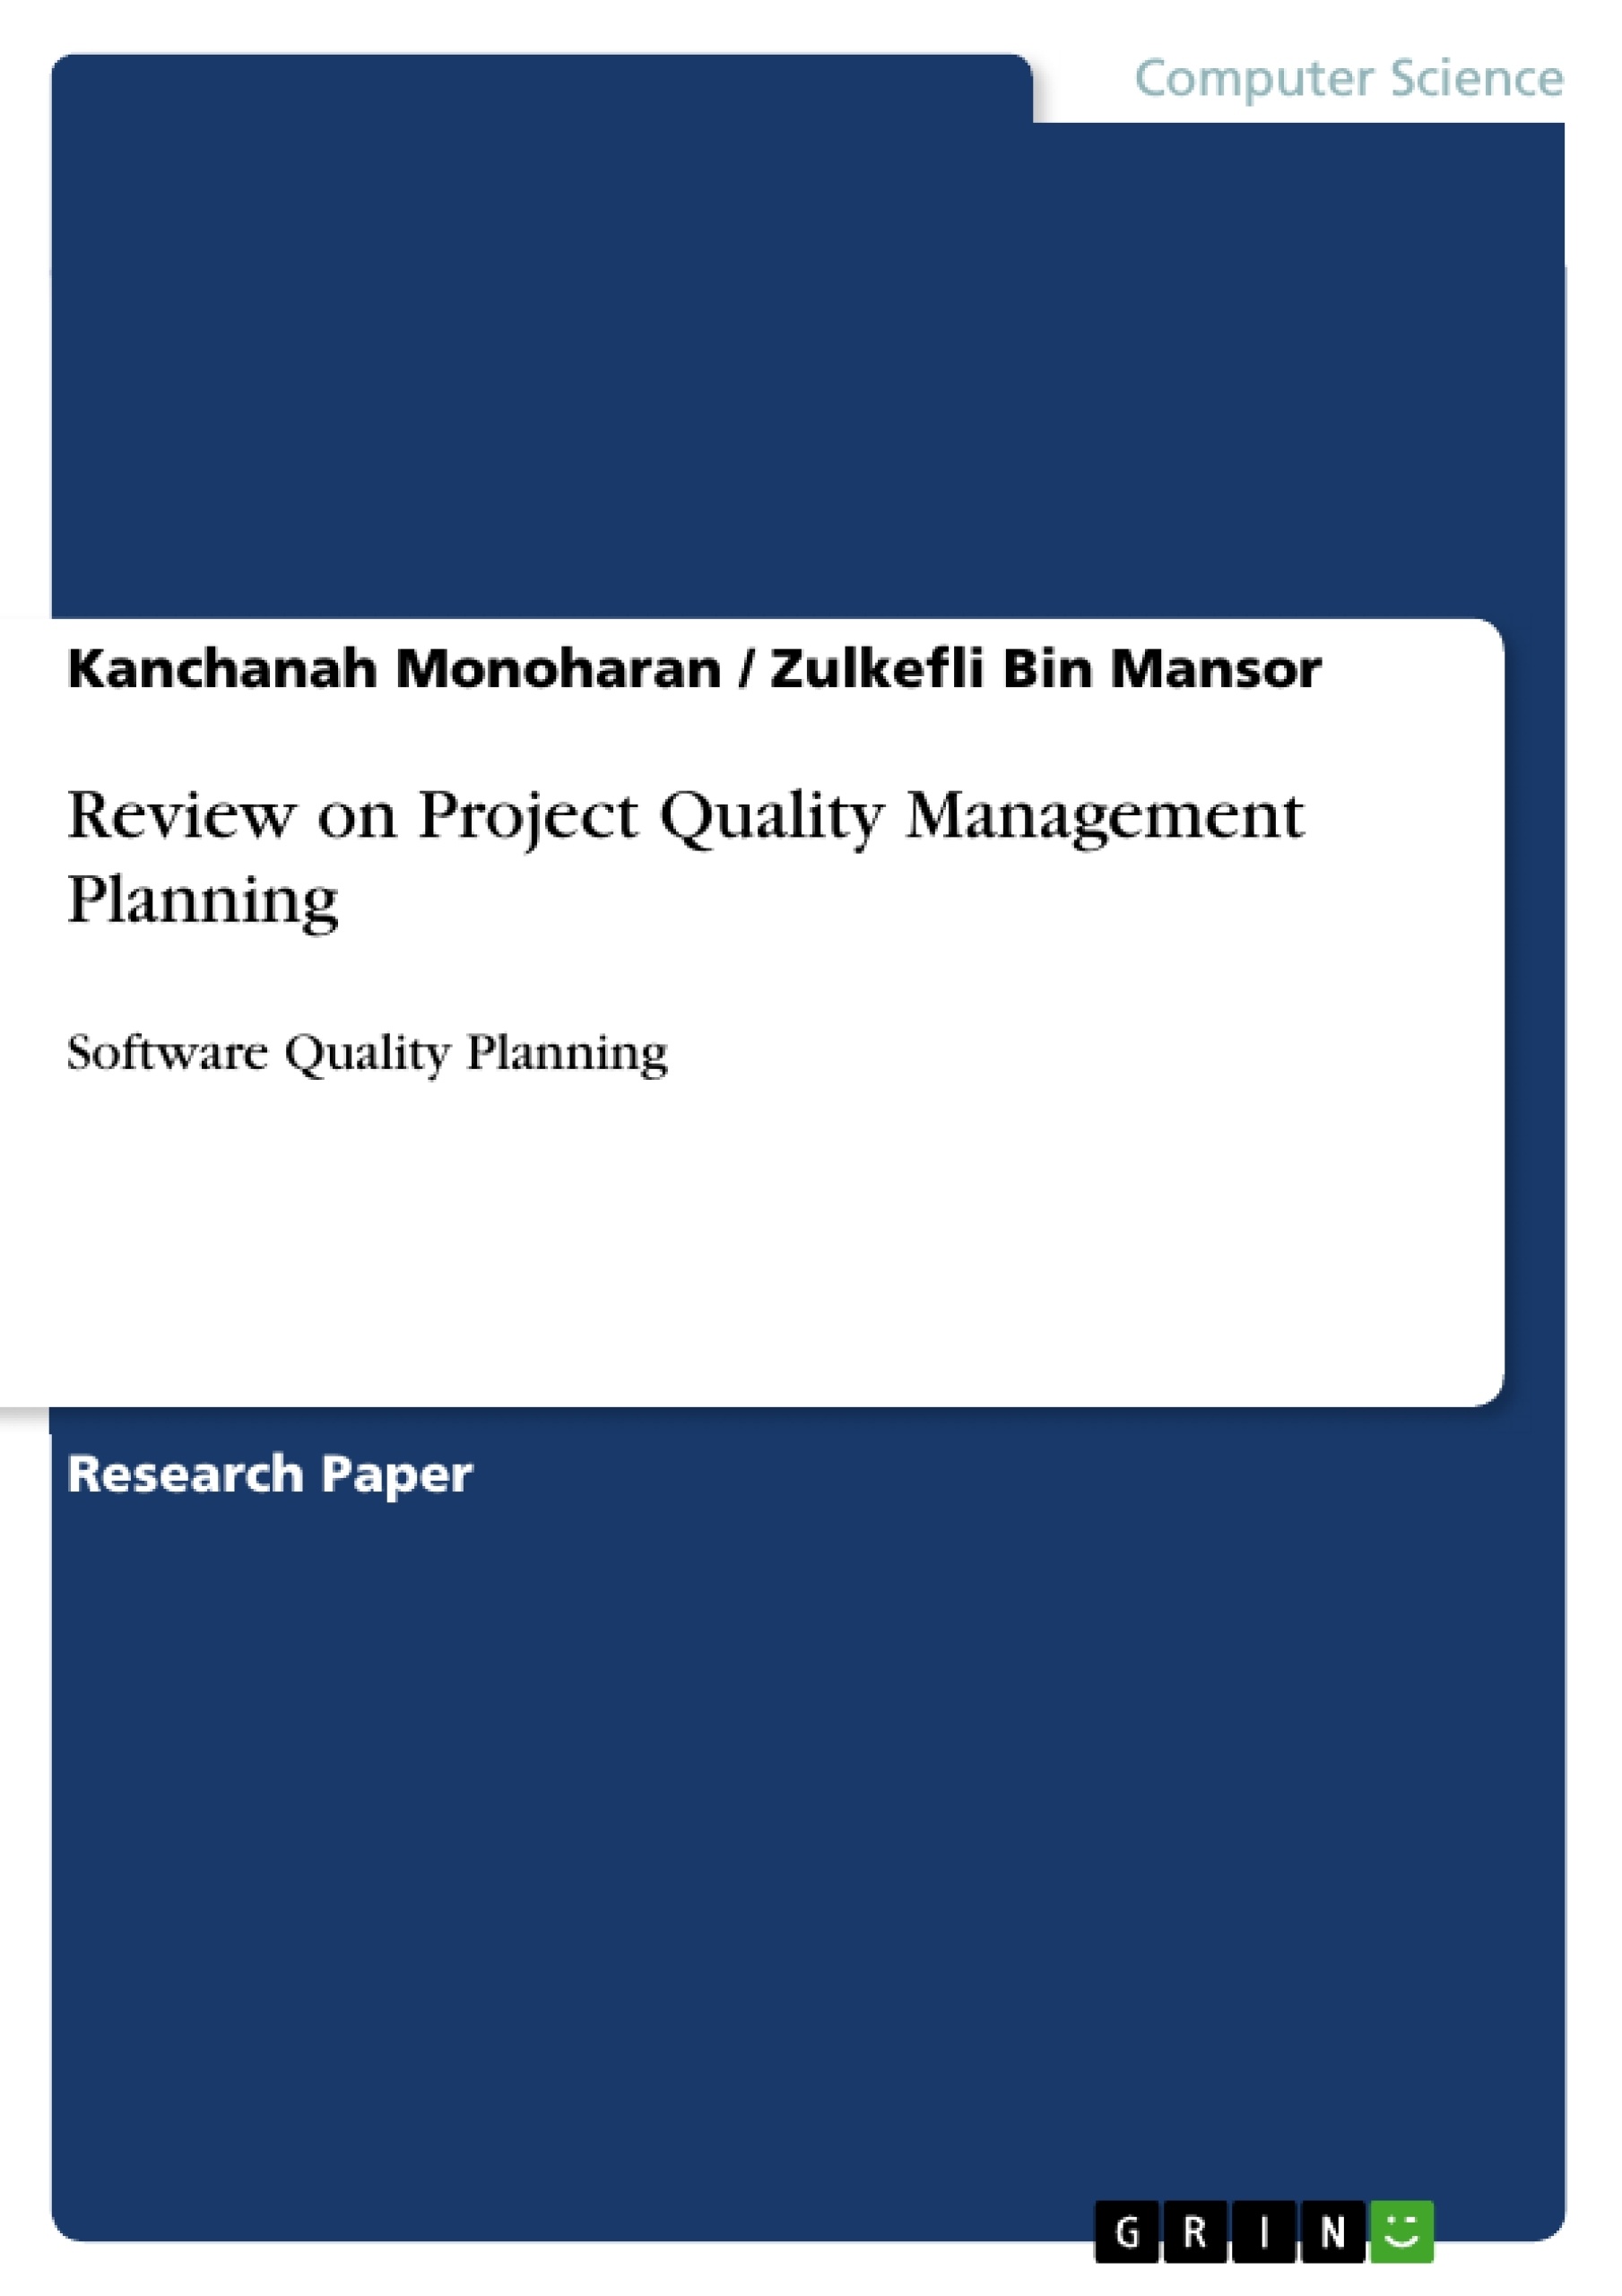 Title: Review on Project Quality Management Planning